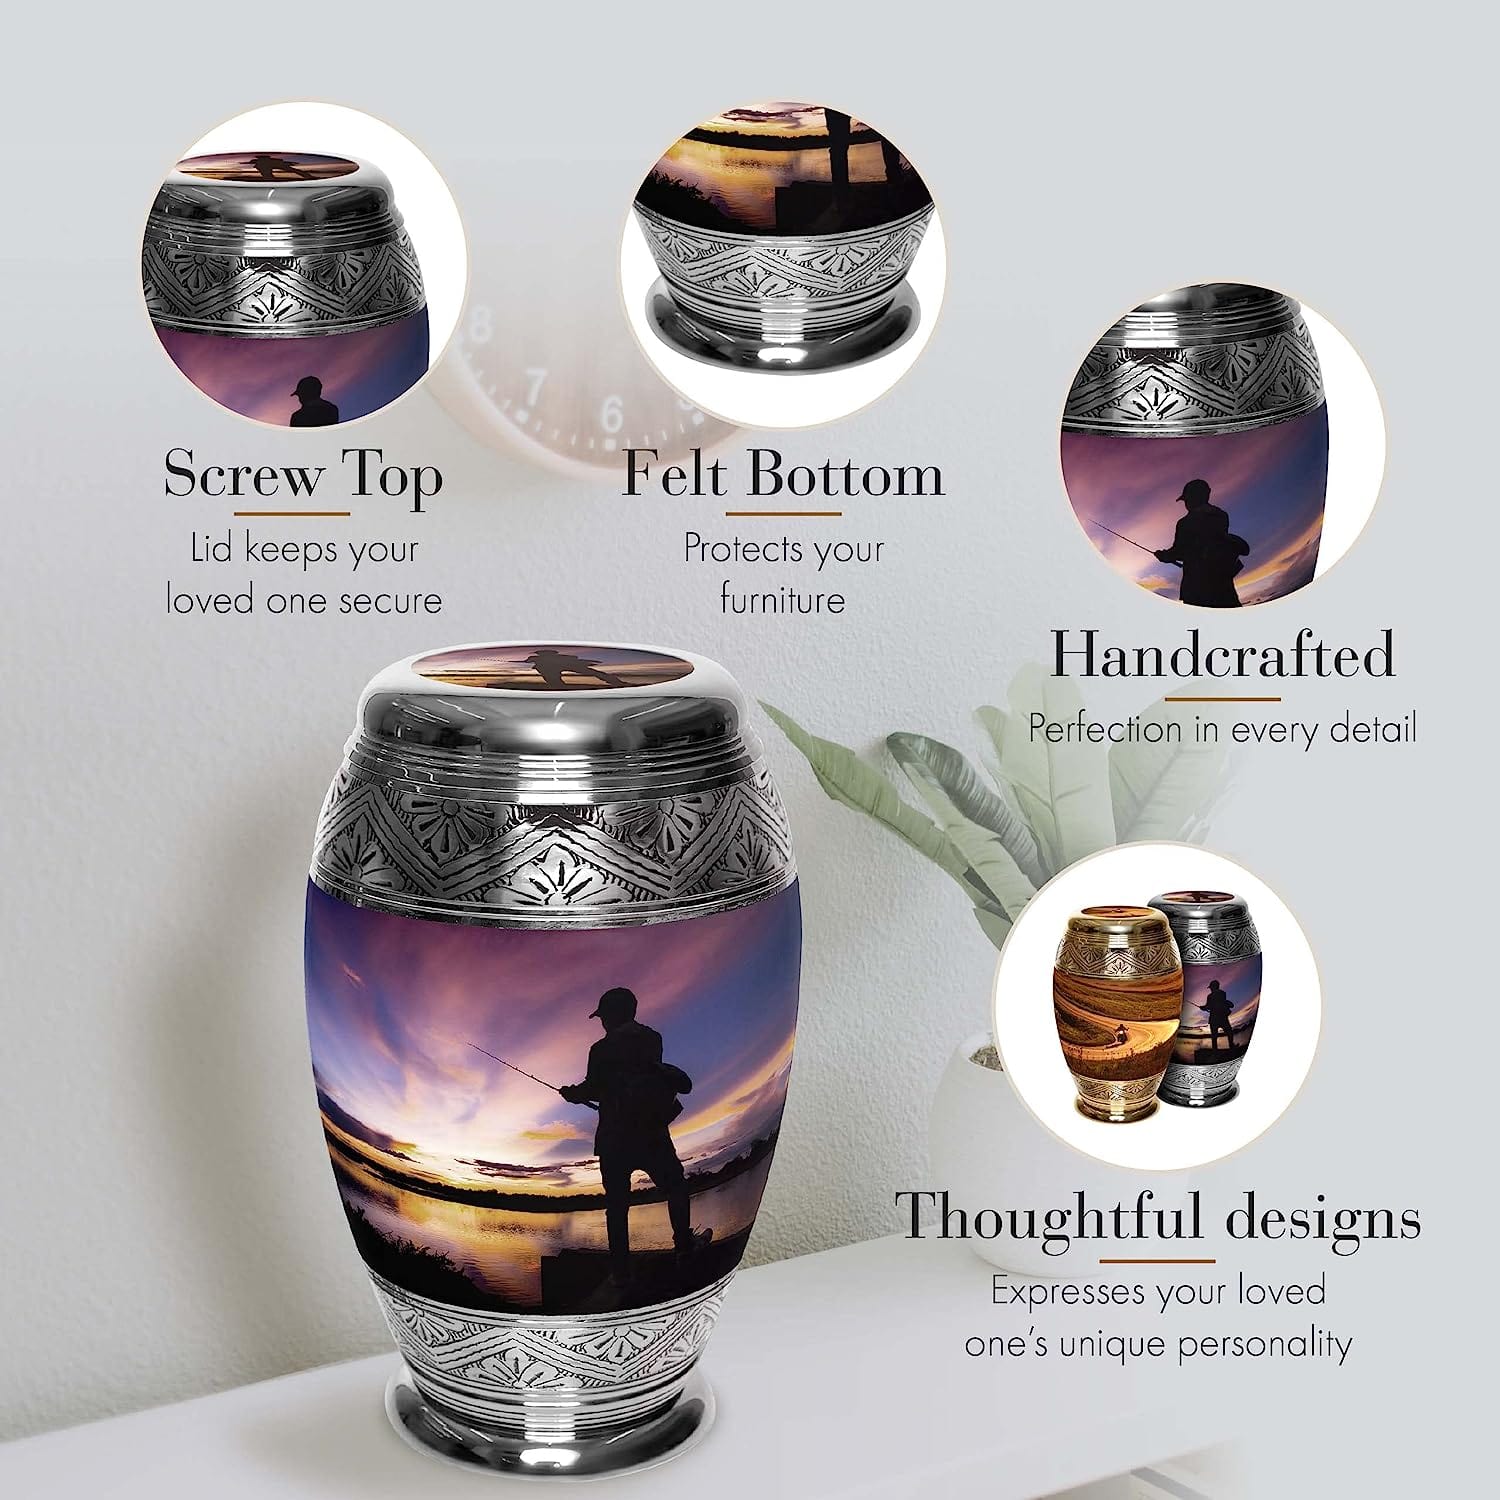 Gone Fishing Cremation Urns for Human Ashes Adult Urns for Cremation Ashes Urns for Adult Cremation Ashes Urns for Ashes Cremation Urns for Human